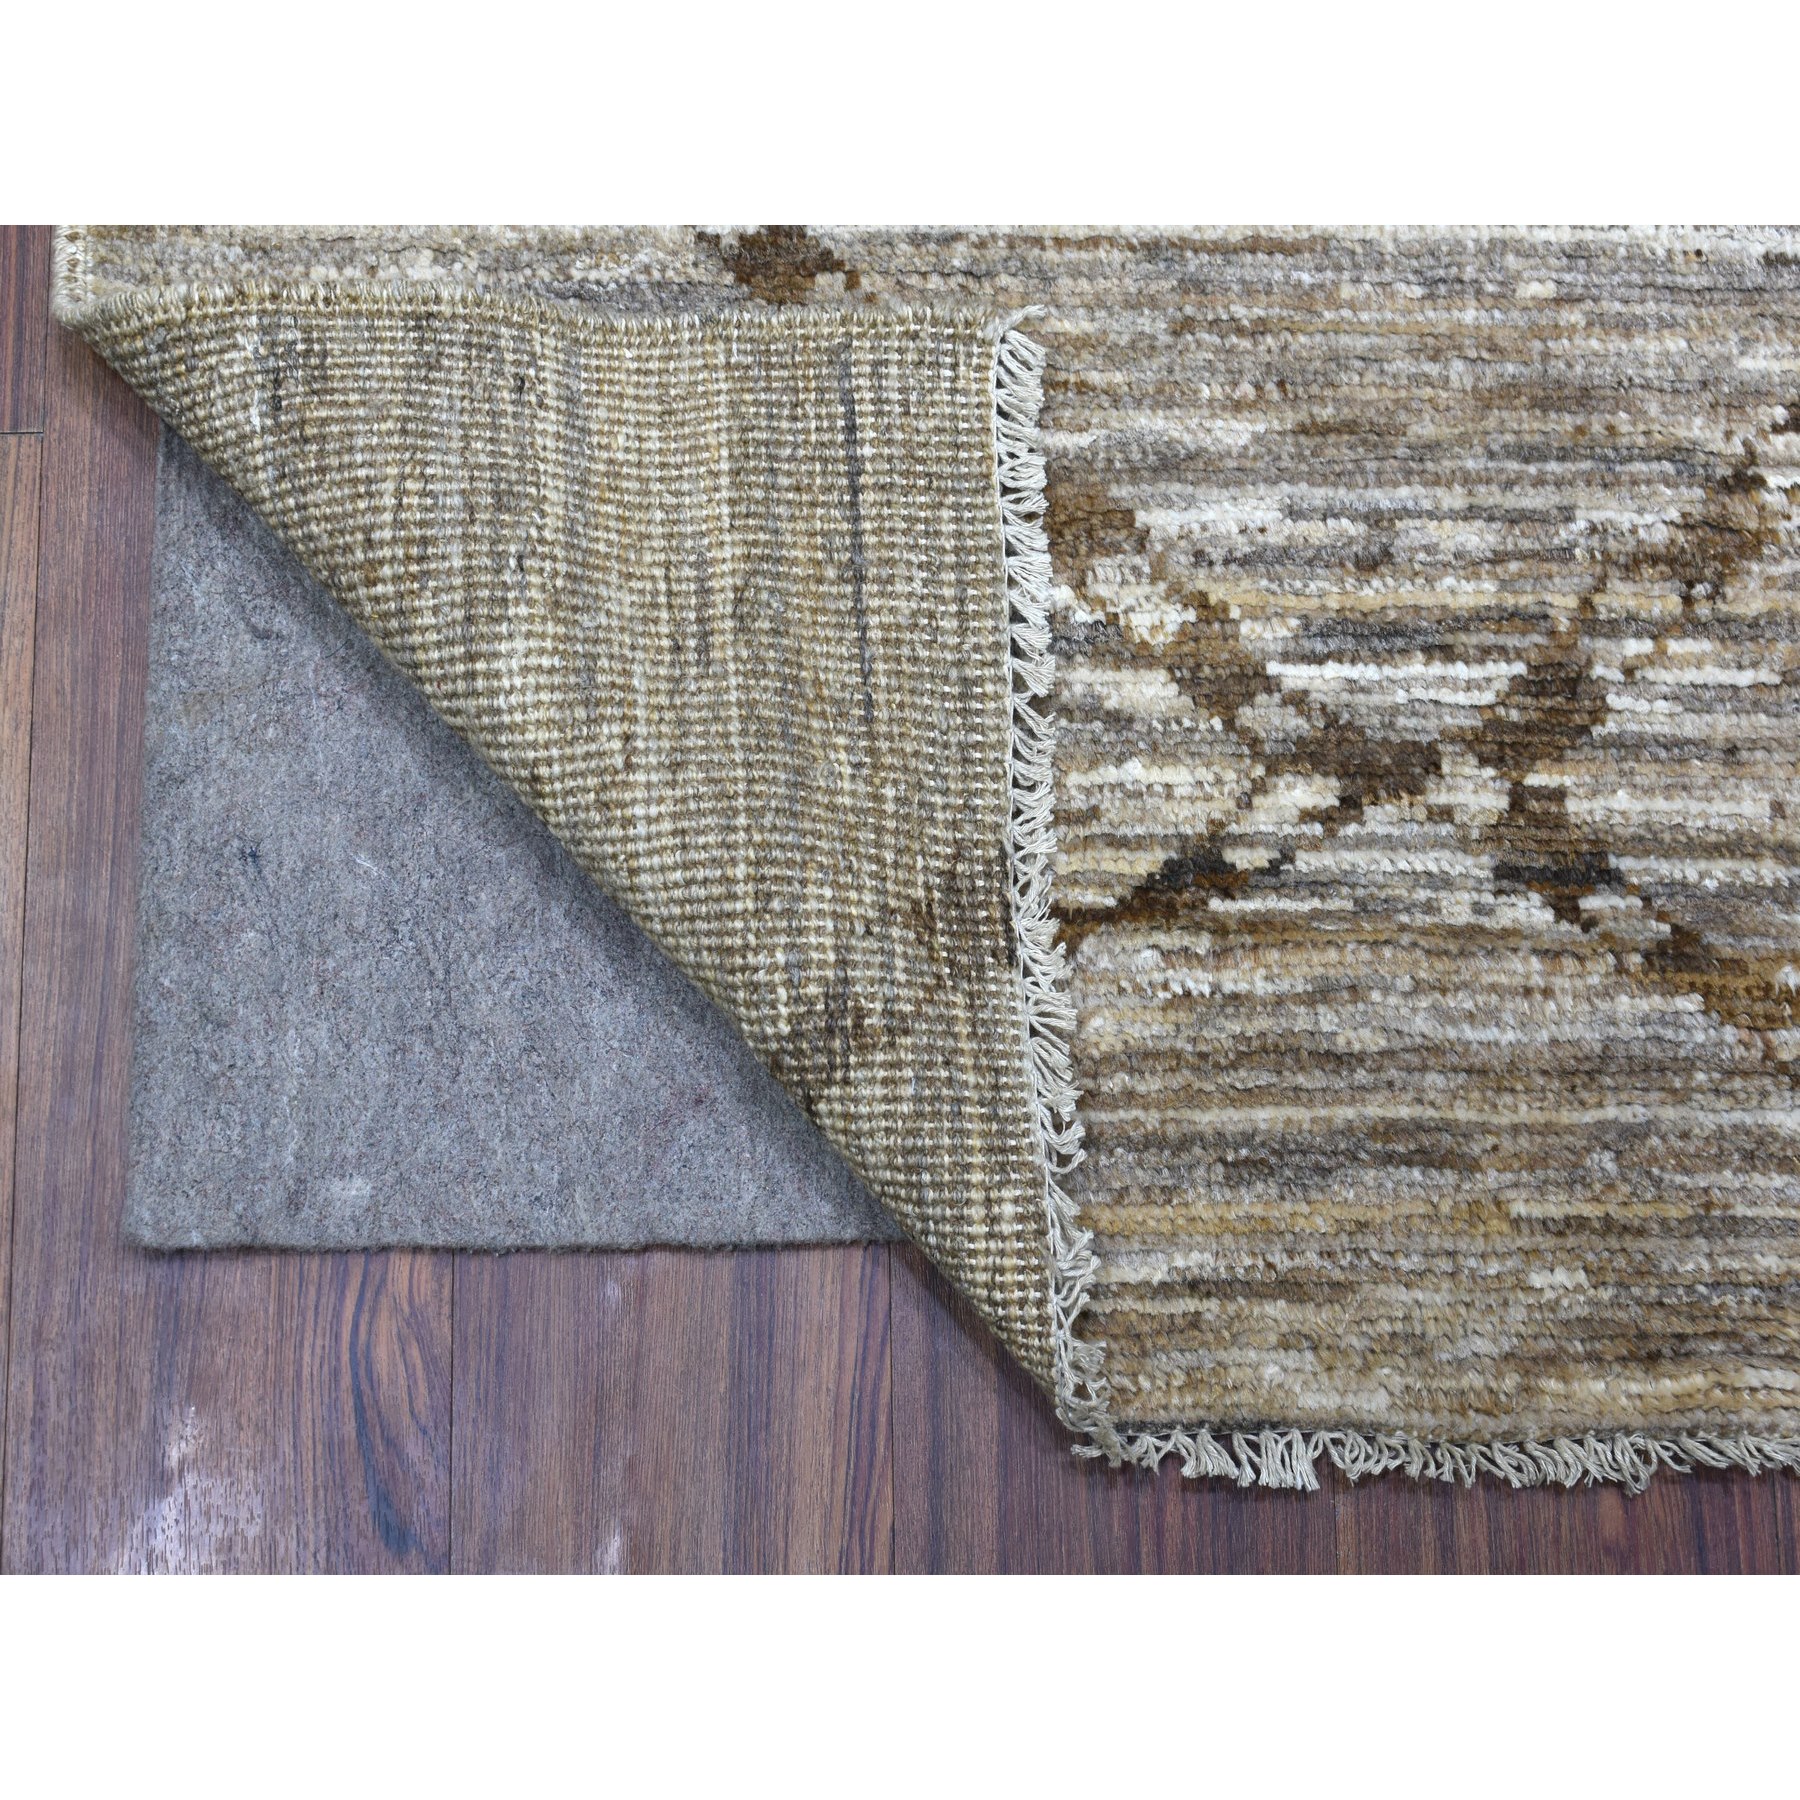 4'x5'9" Moroccan Berber with Criss Cross Design Brown Soft Afghan Wool Hand Woven Oriental Rug 